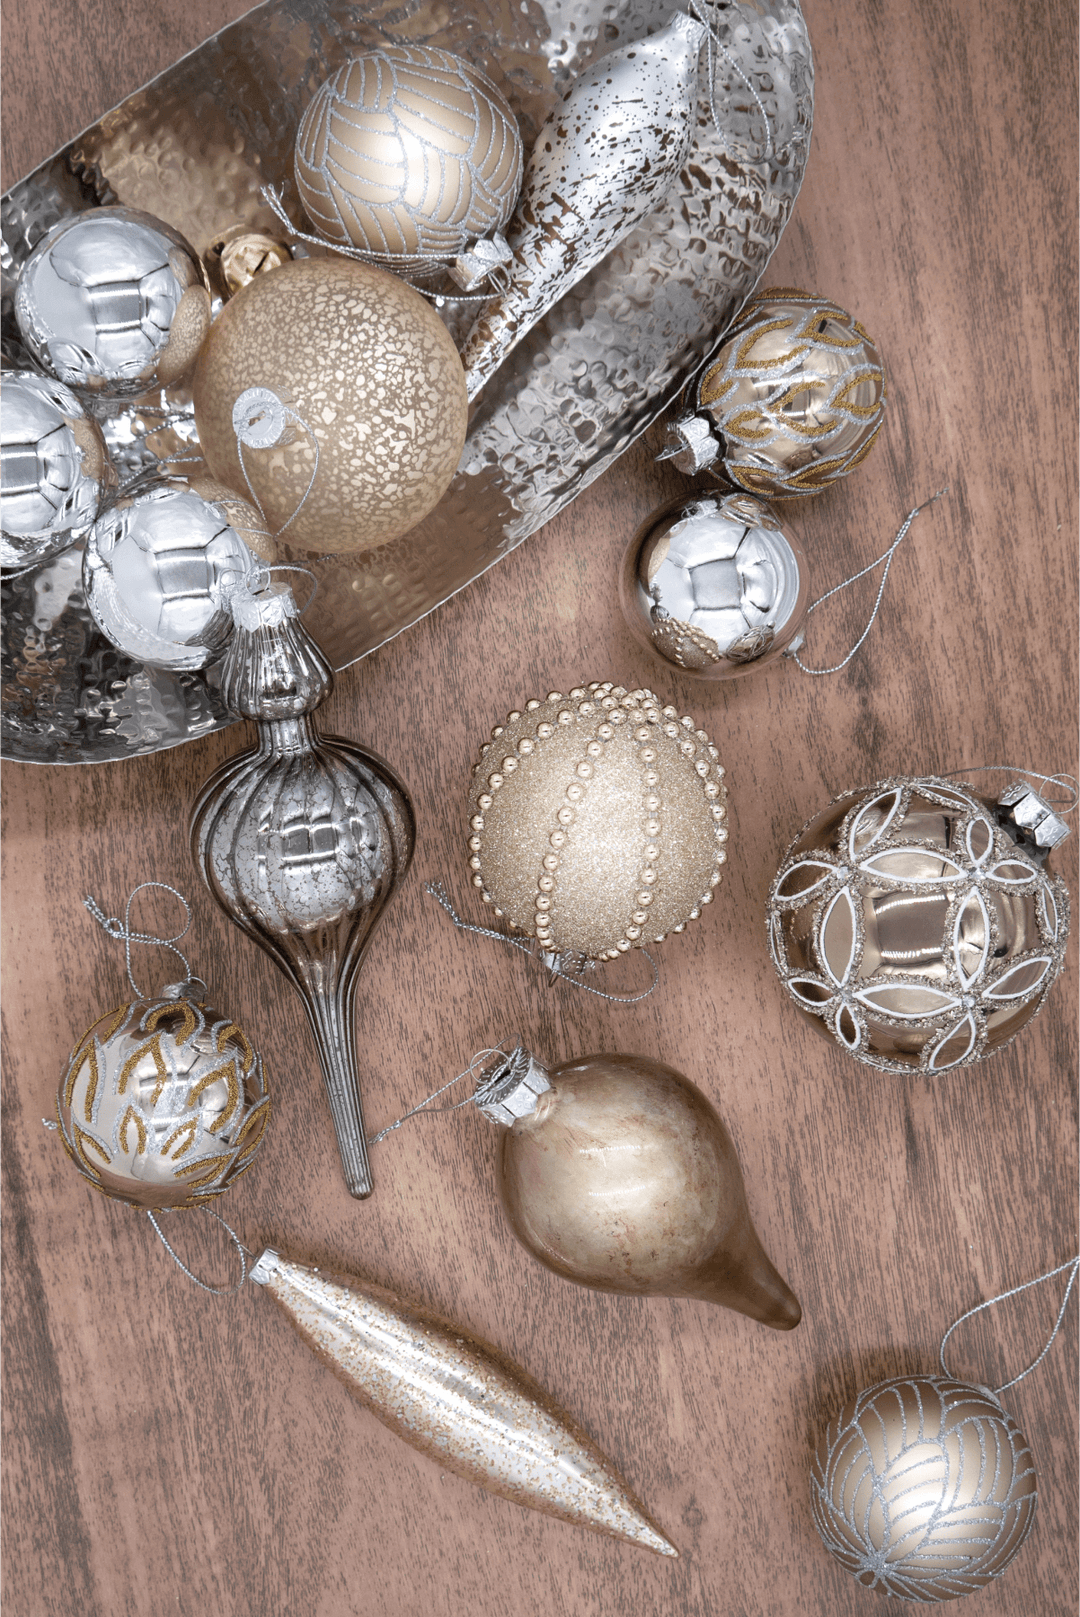 King of Christmas Mixed Metals 15-Piece Glass Ornament Set (Silver-Gold)